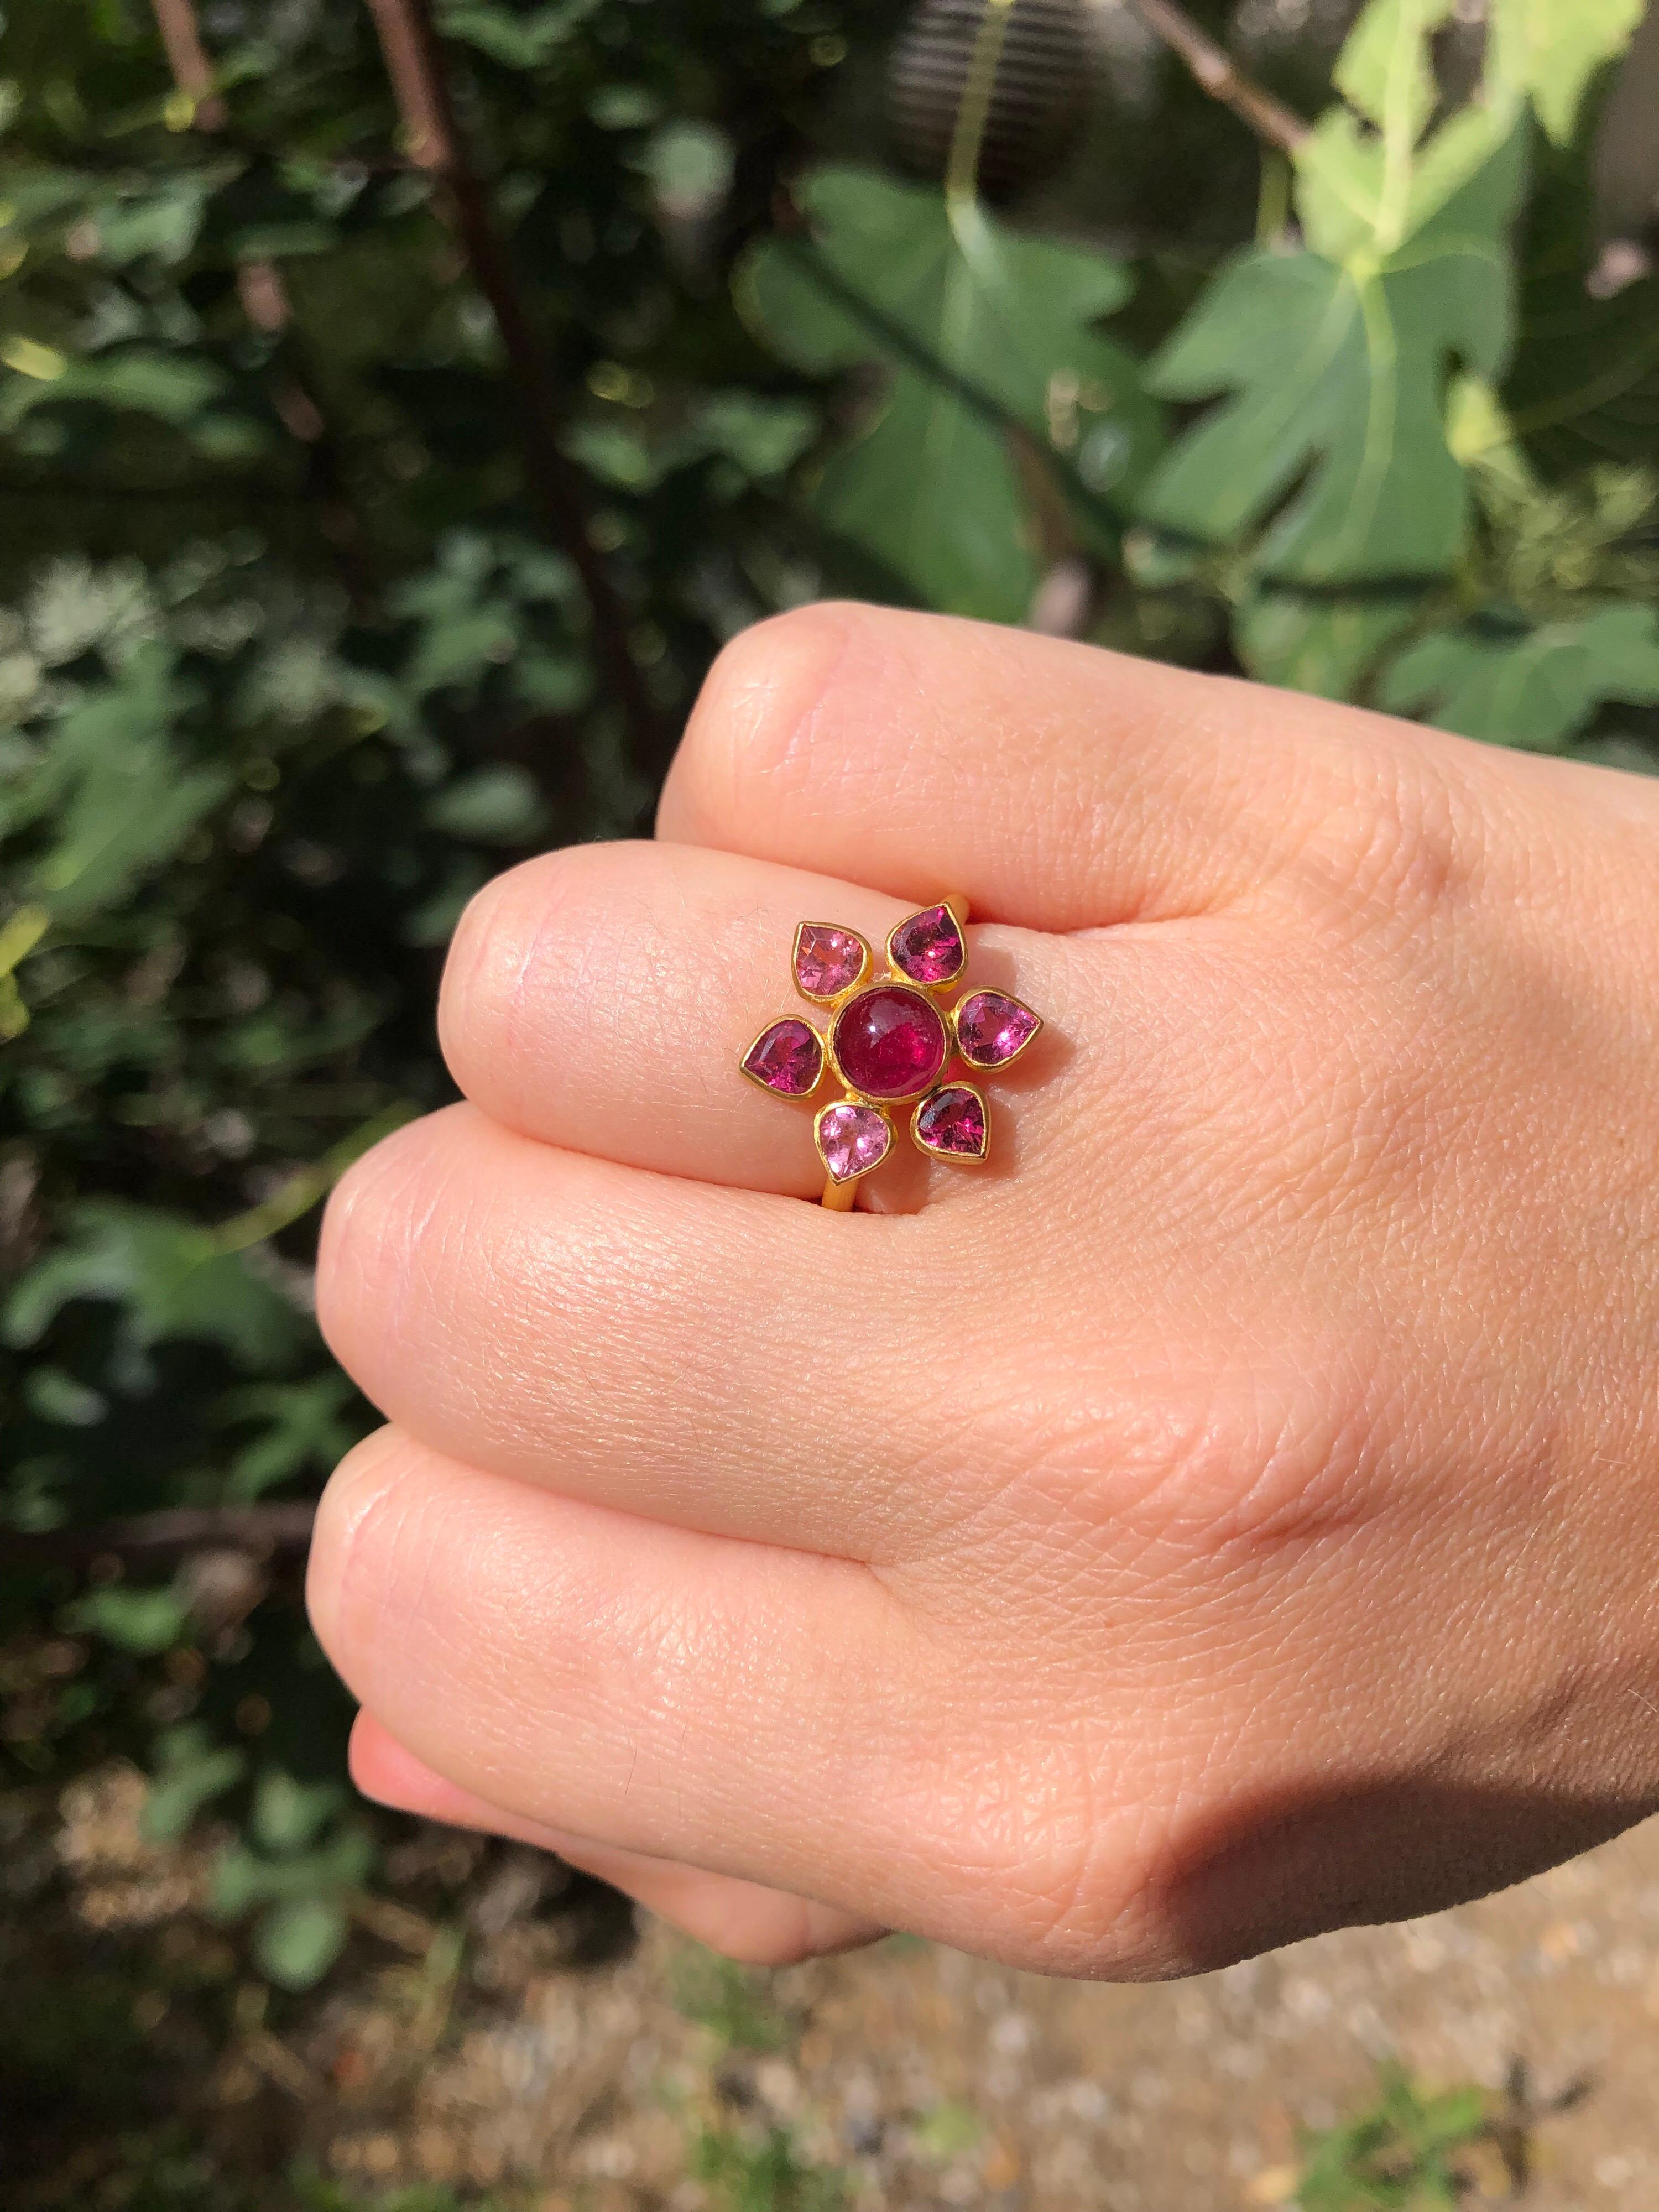 Scrives Flower power ring is composed of a round pink tourmaline cabochon surrounded by 6 pear shape faceted tourmalines of various hues. 

The stones are natural untreated tourmalines and show natural typical inclusions. 

This one-of-a-kind ring